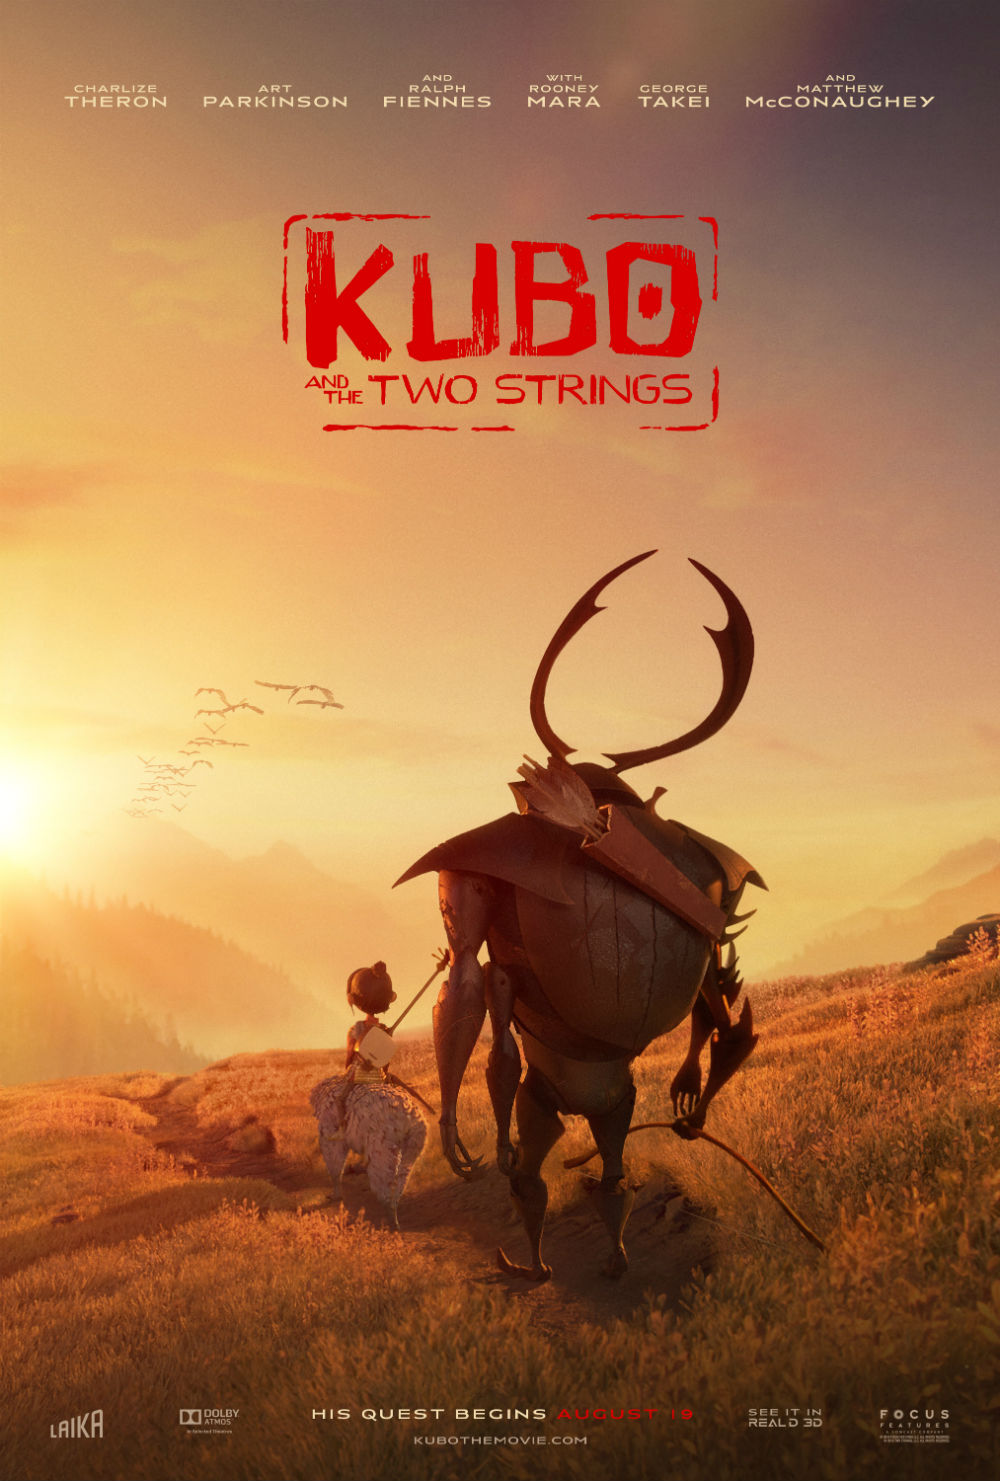 The Adventure Is Bigger Than Ever In The Last Kubo And The Two Strings Trailer 